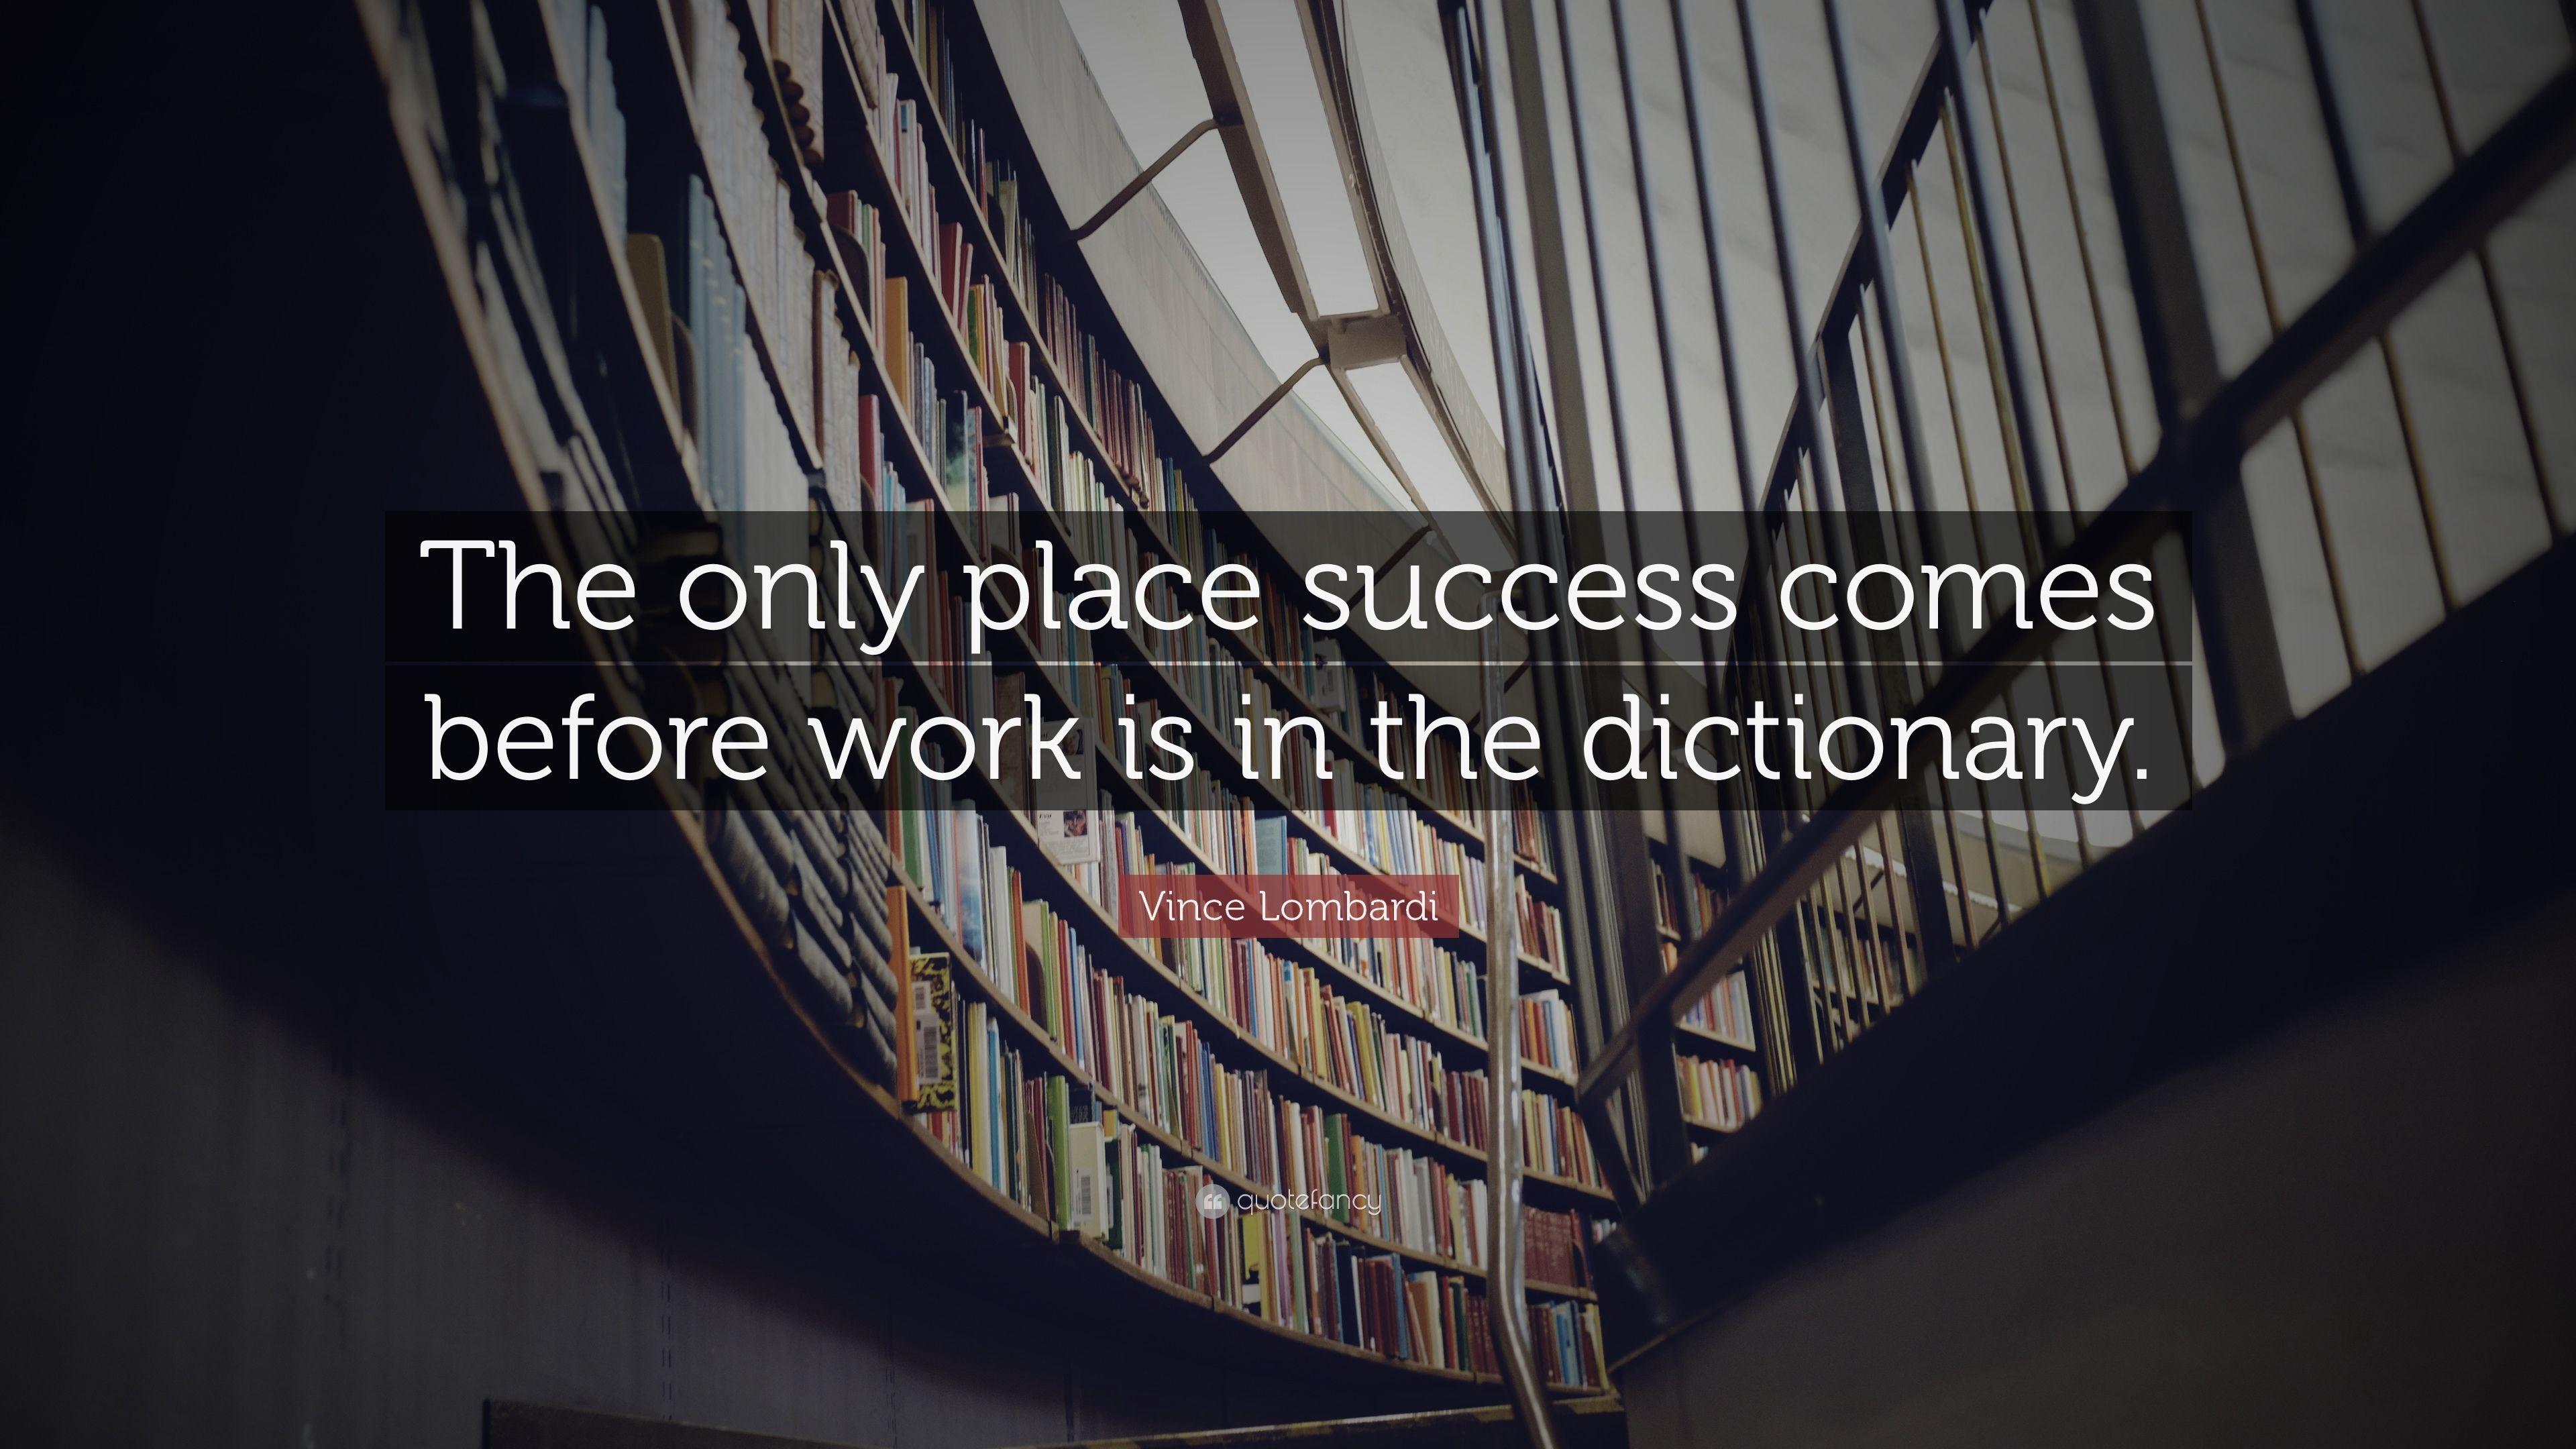 Vince Lombardi Quote: “The only place success comes before work is